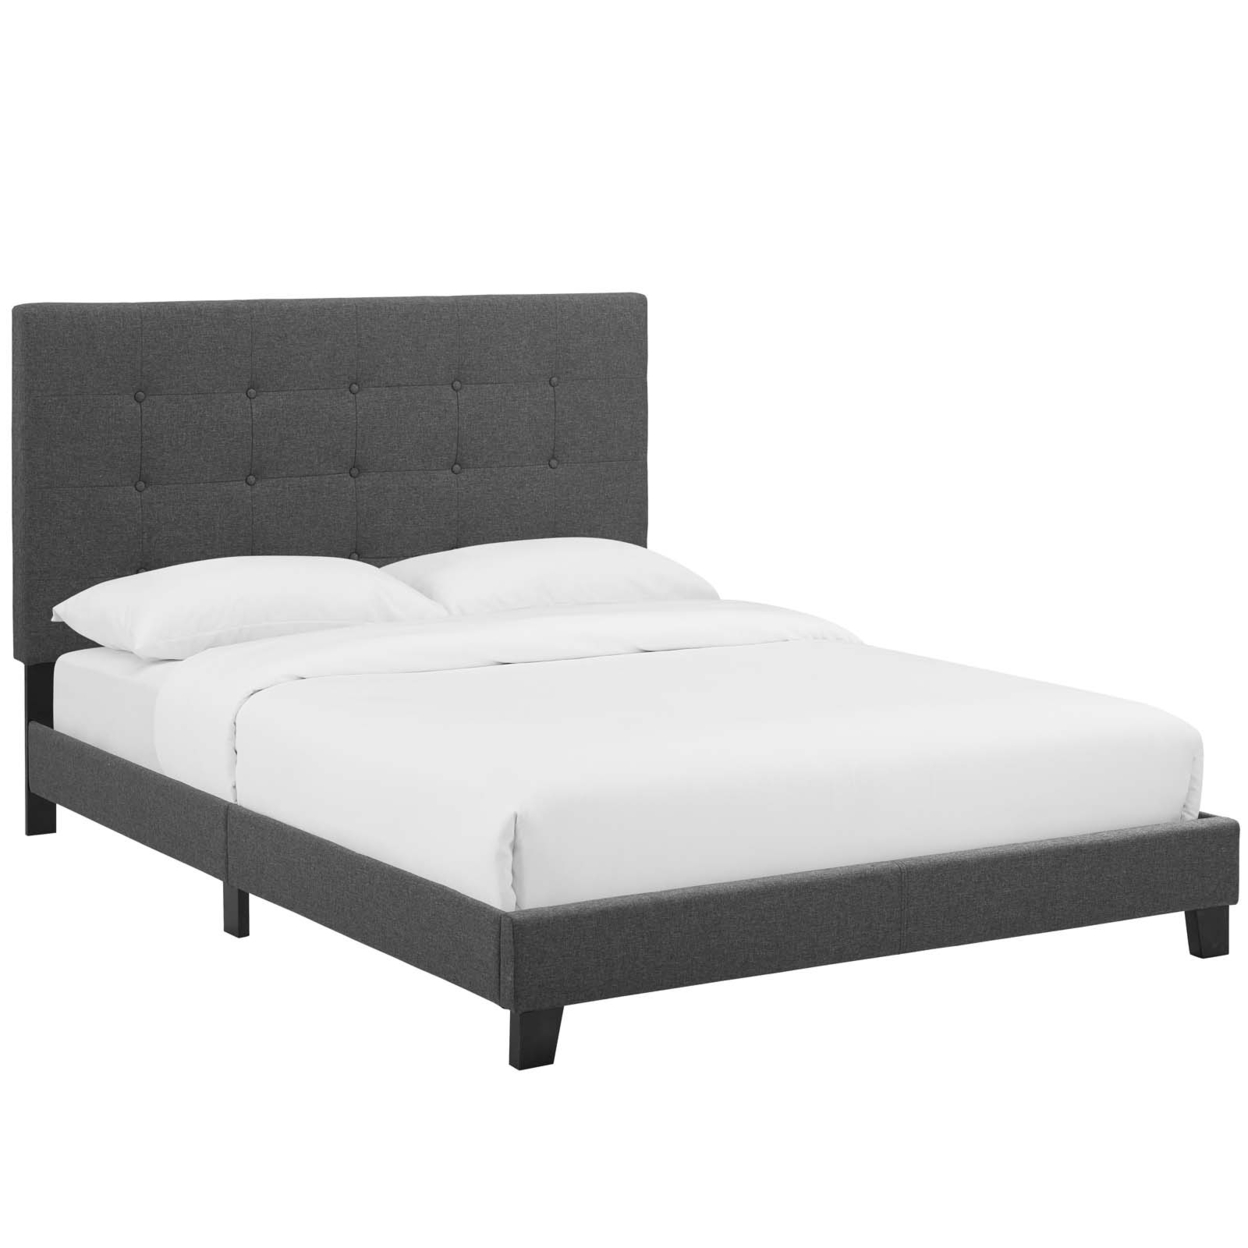 Melanie King Tufted Button Upholstered Fabric Platform Bed, Gray